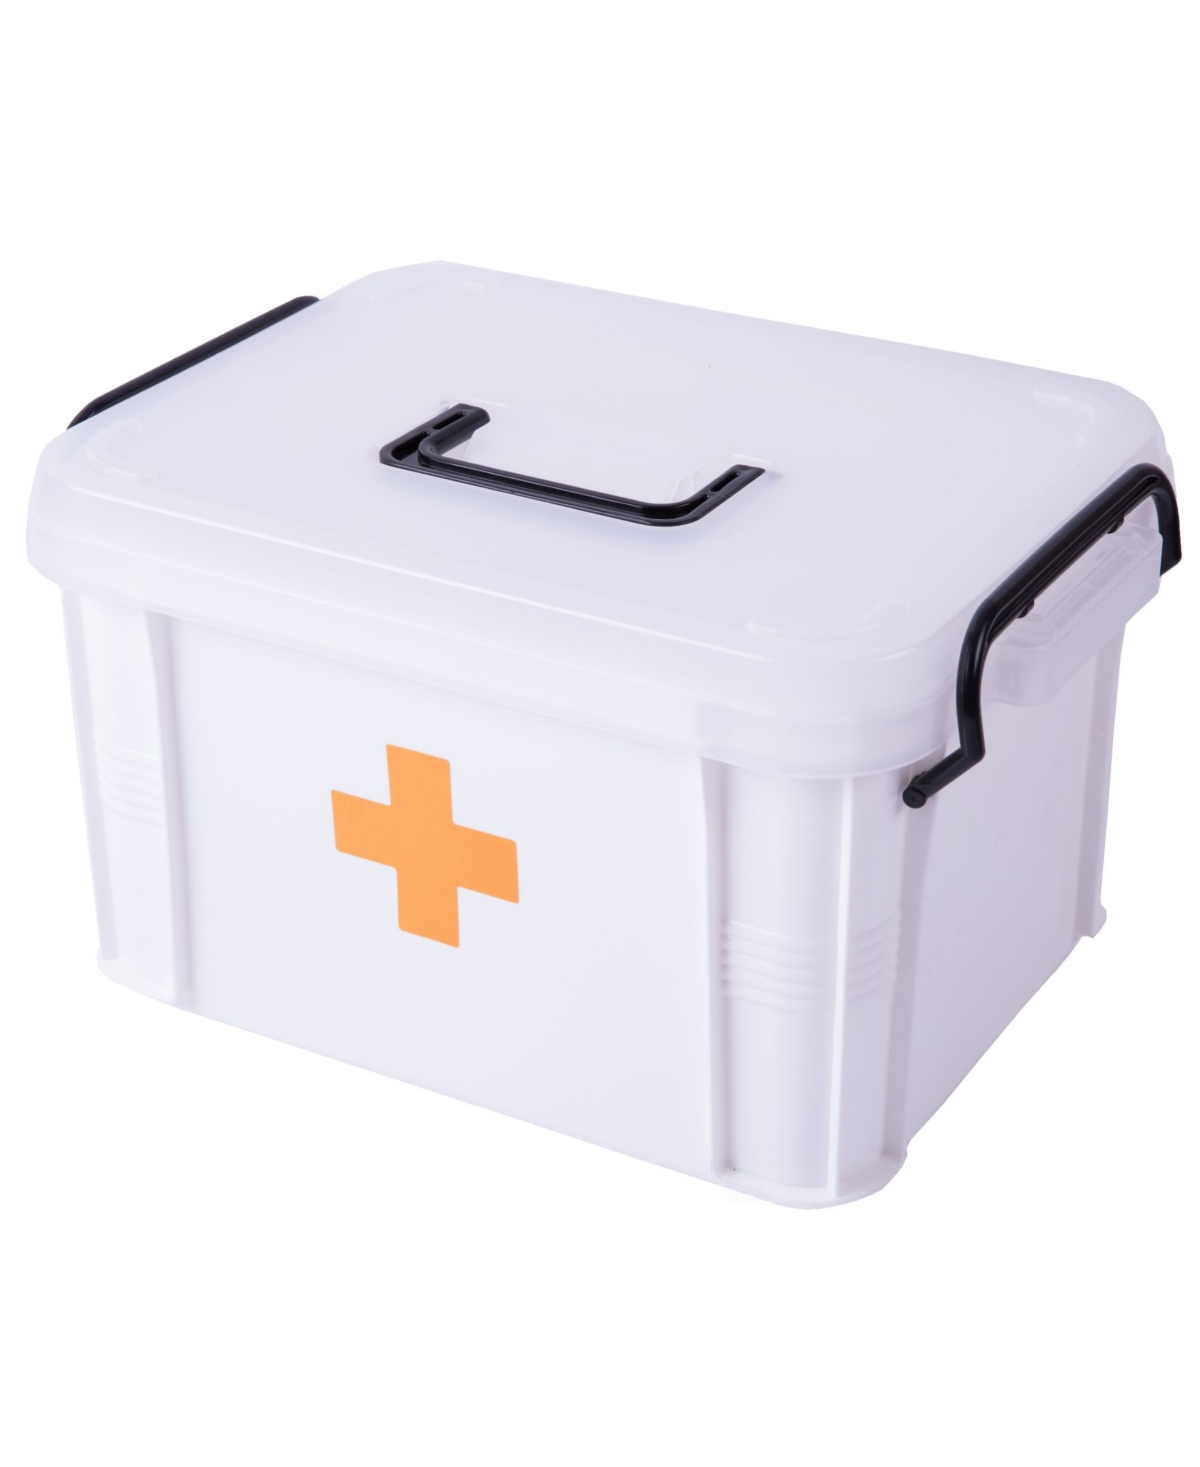 Vintiquewise First Aid Medical Kit Container - White